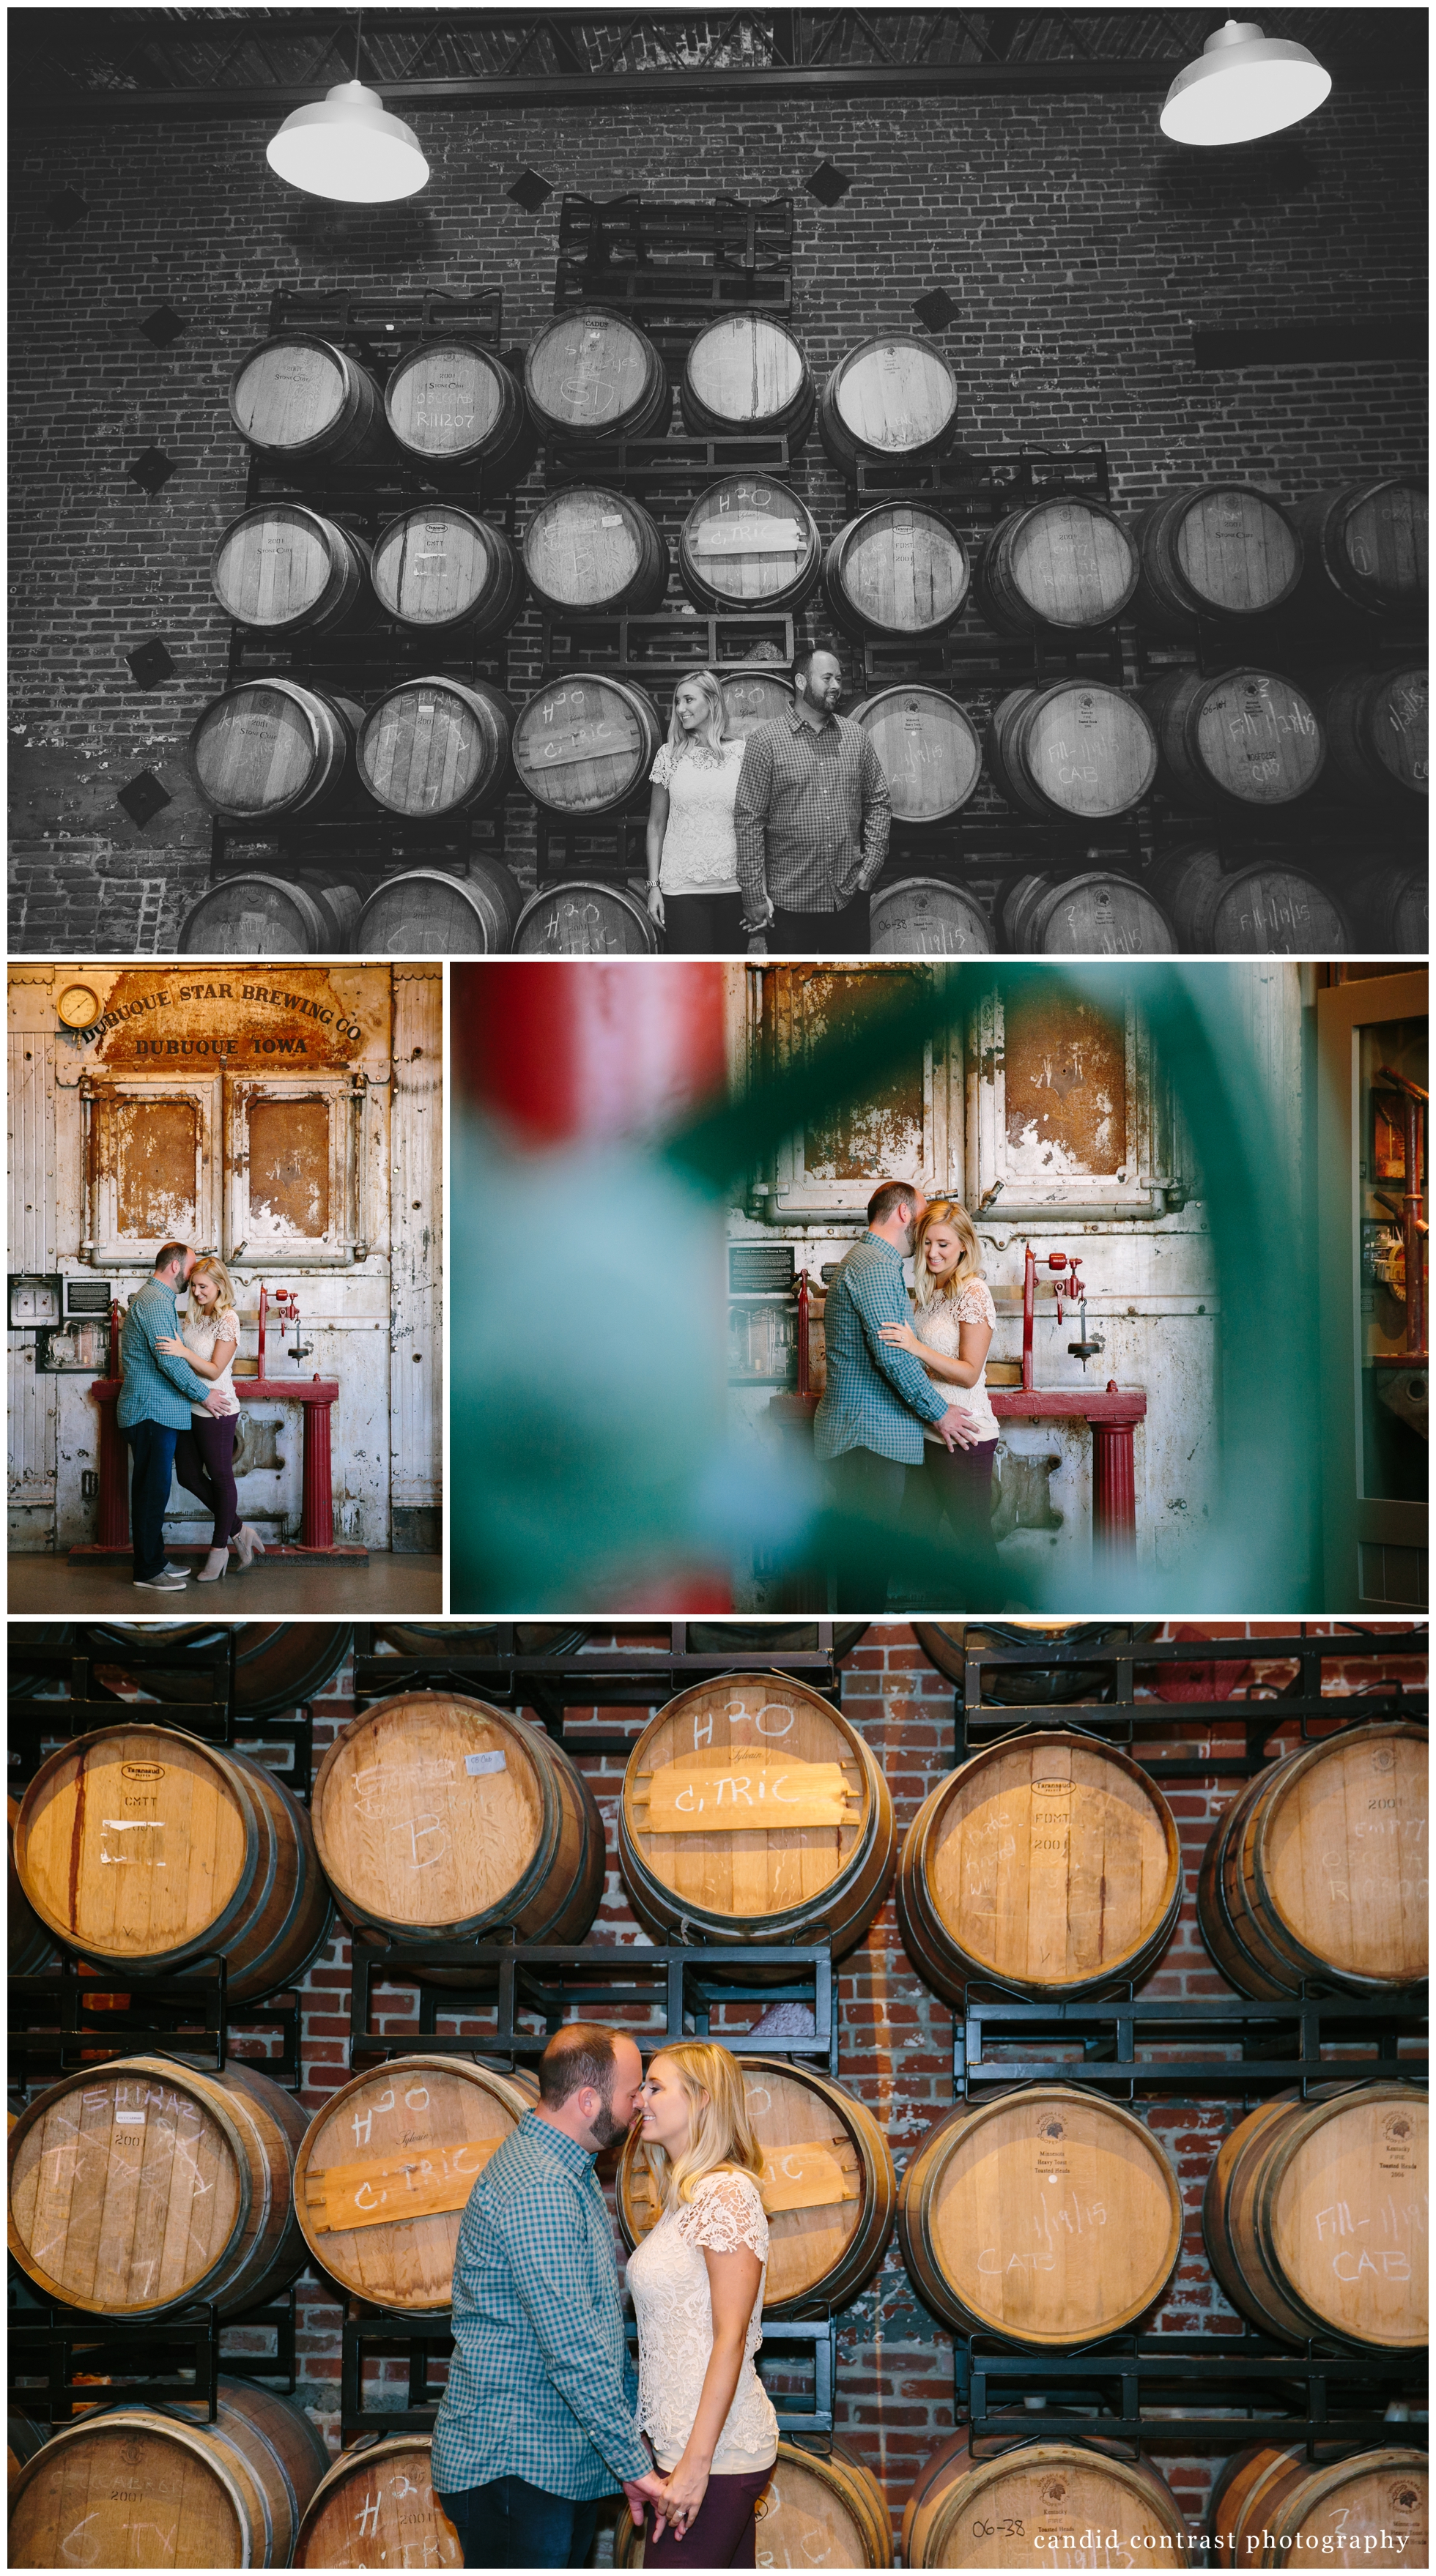 romantic engagement session at stone cliff winery in dubuque iowa, iowa wedding photographer candid contrast photography